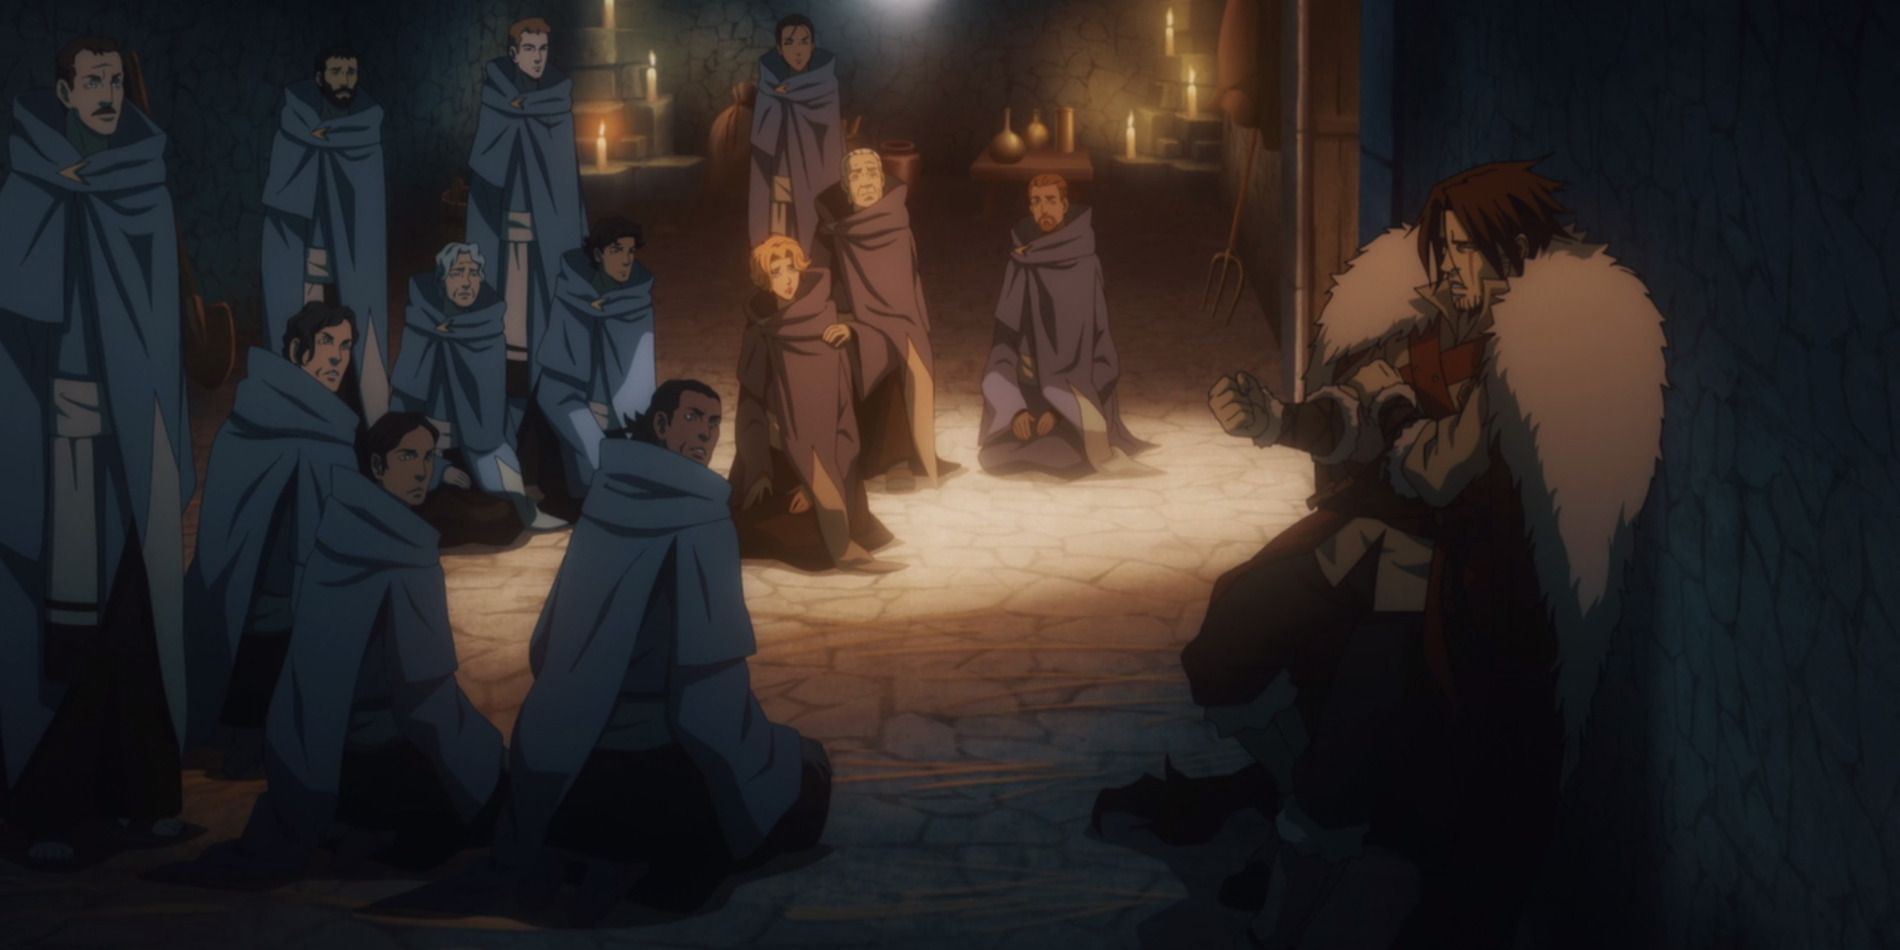 Sypha and the Speakers, Castlevania, Netflix